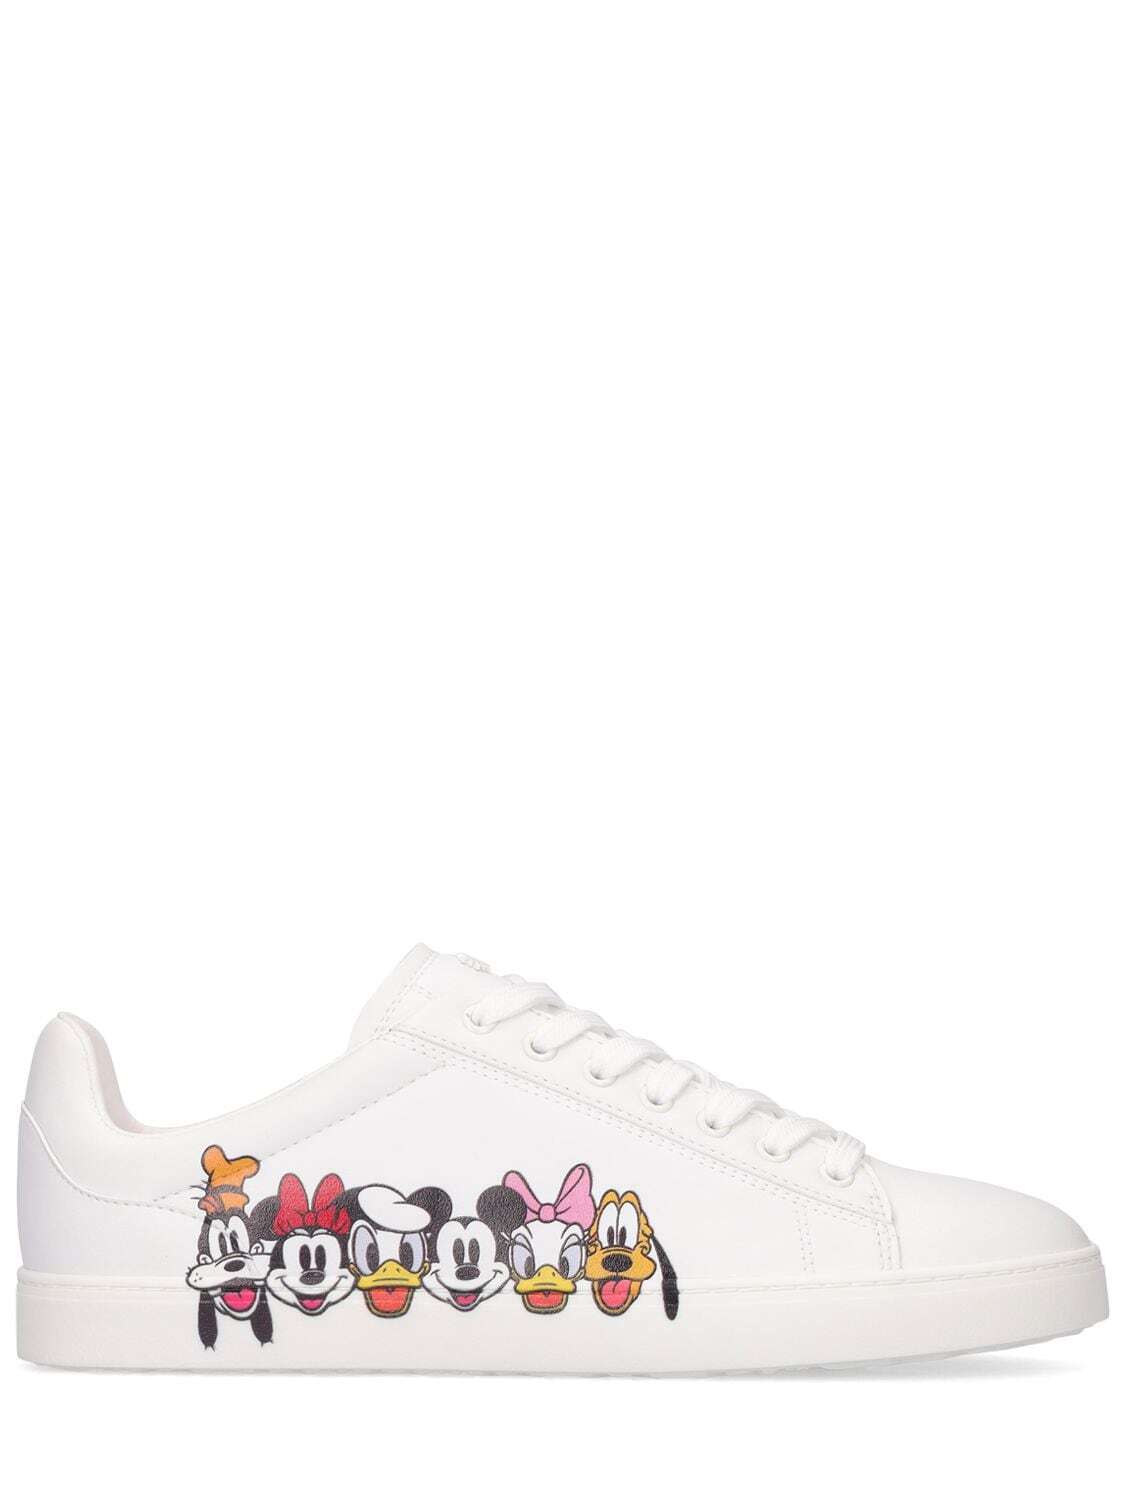 STUART WEITZMAN 45mm Printed Leather Low Sneakers in white